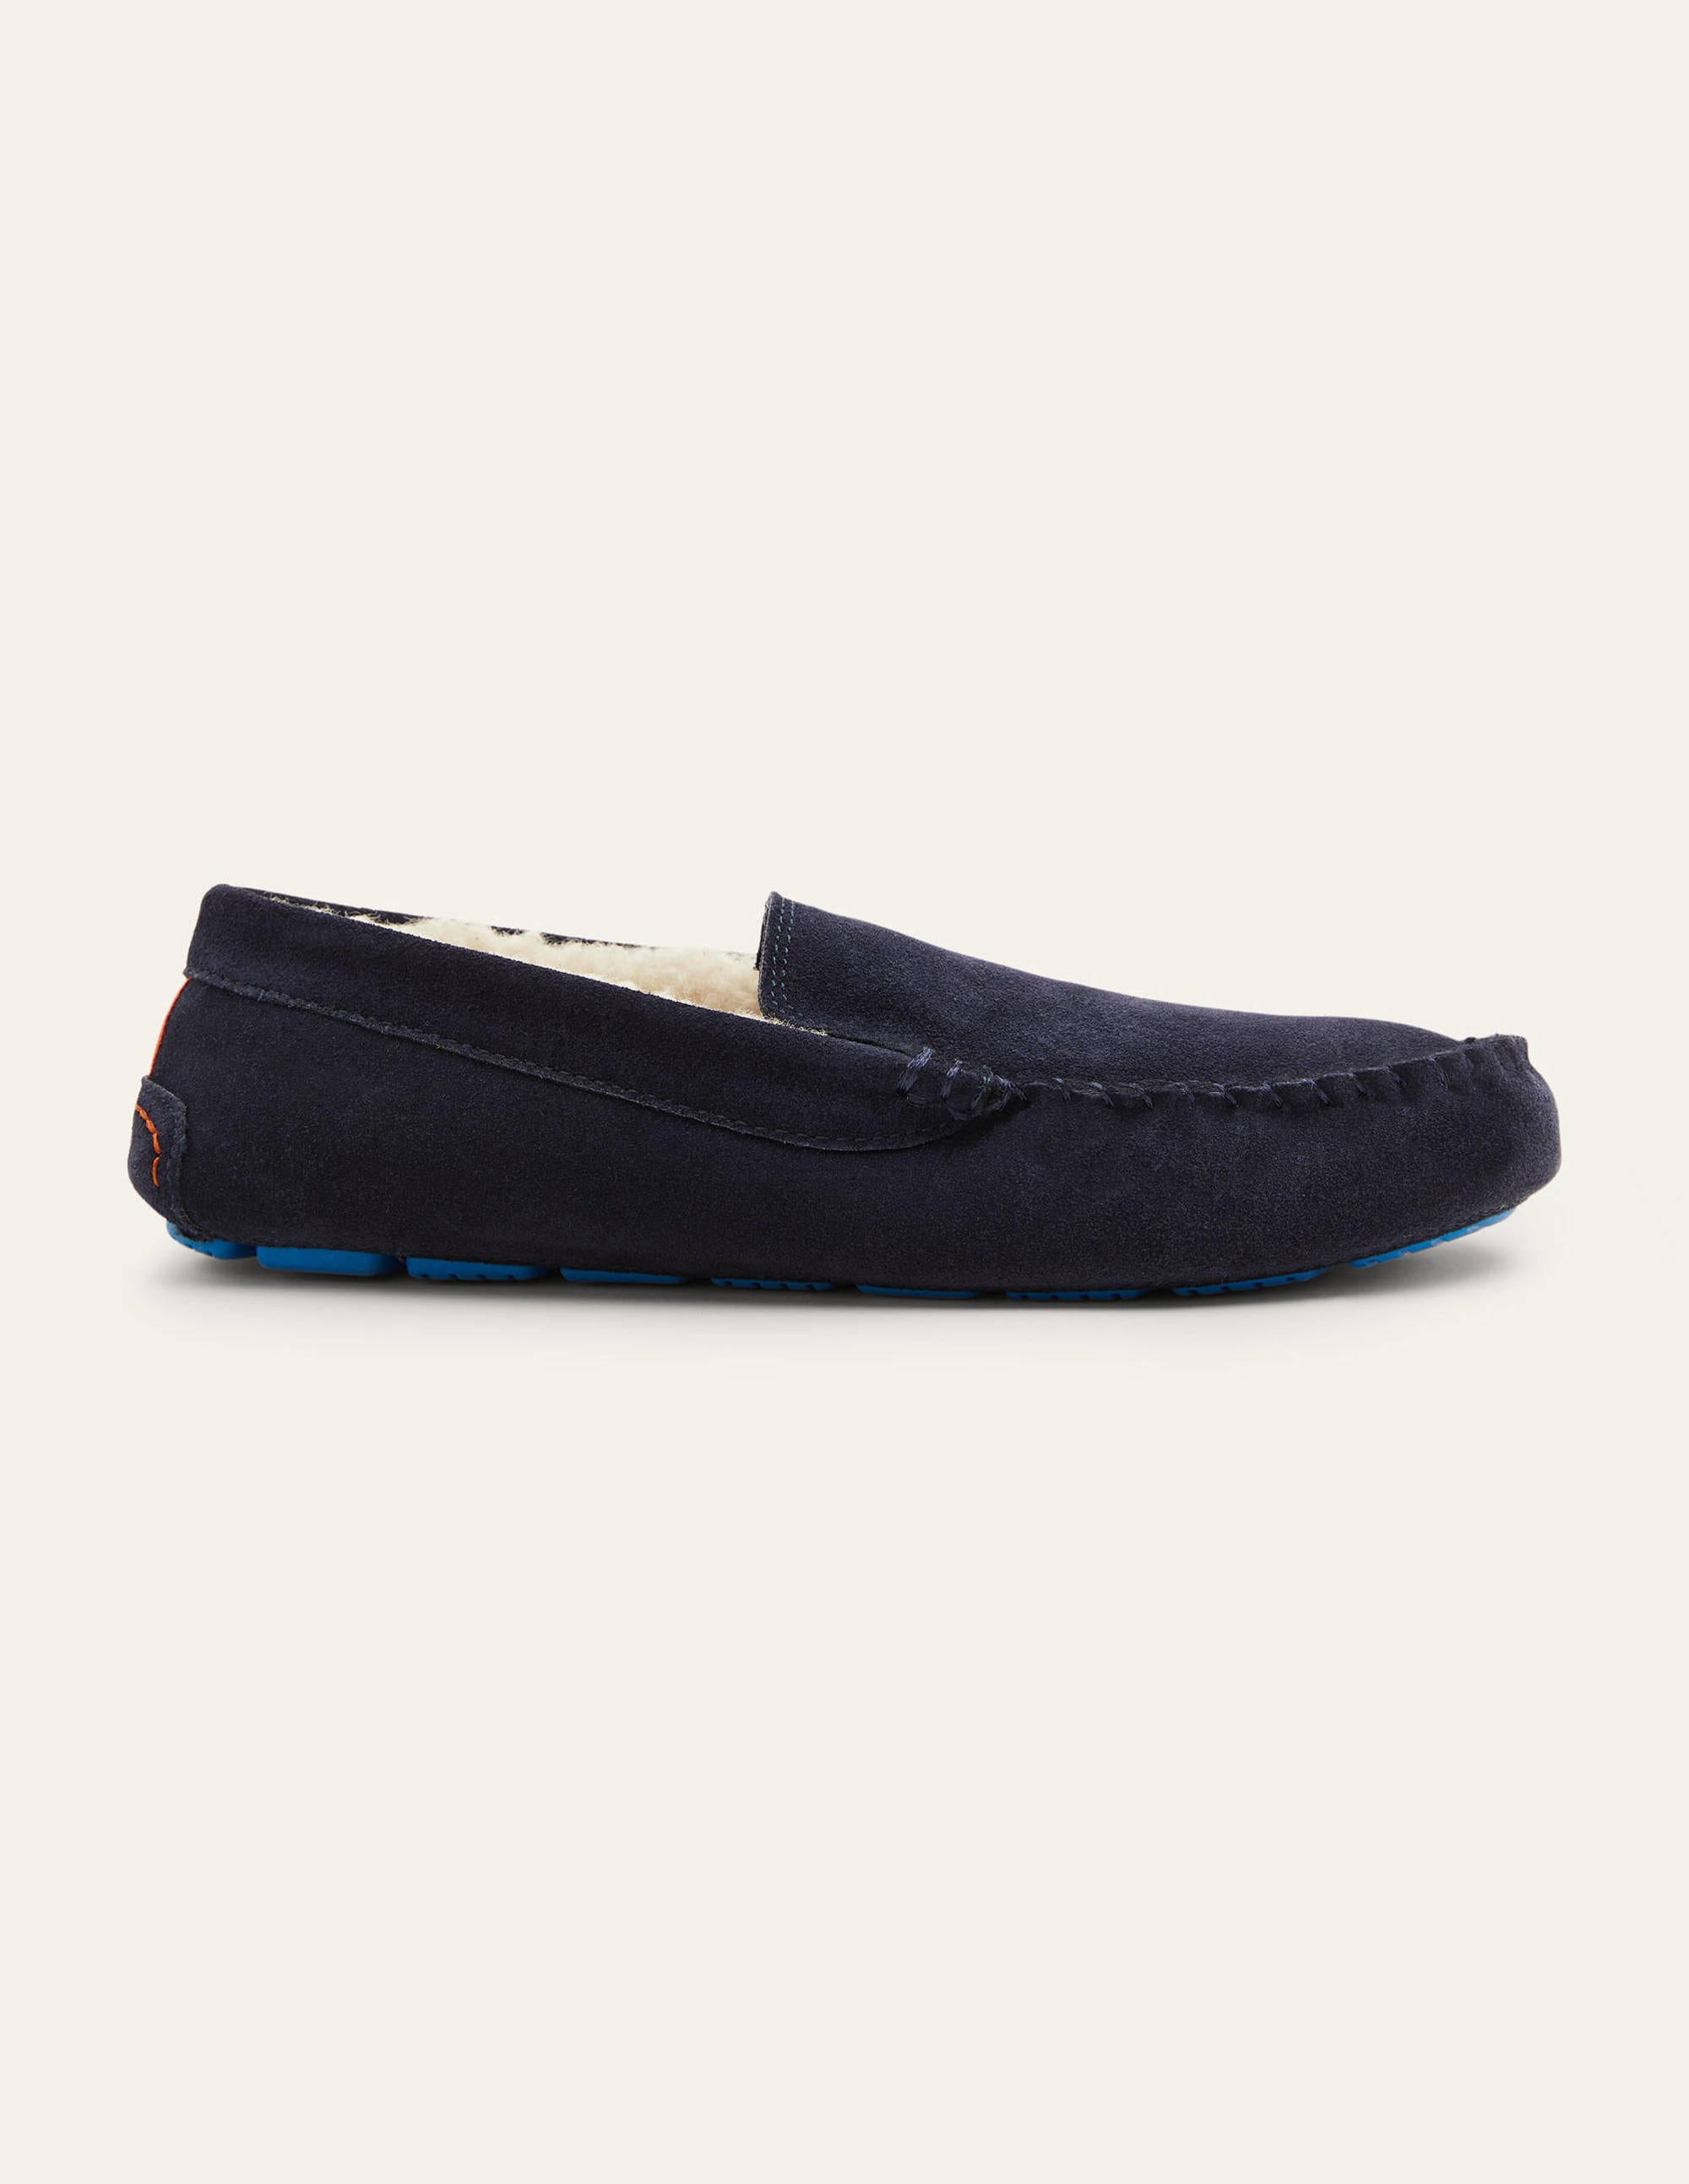 Moccasin Slippers - Navy | Boden US